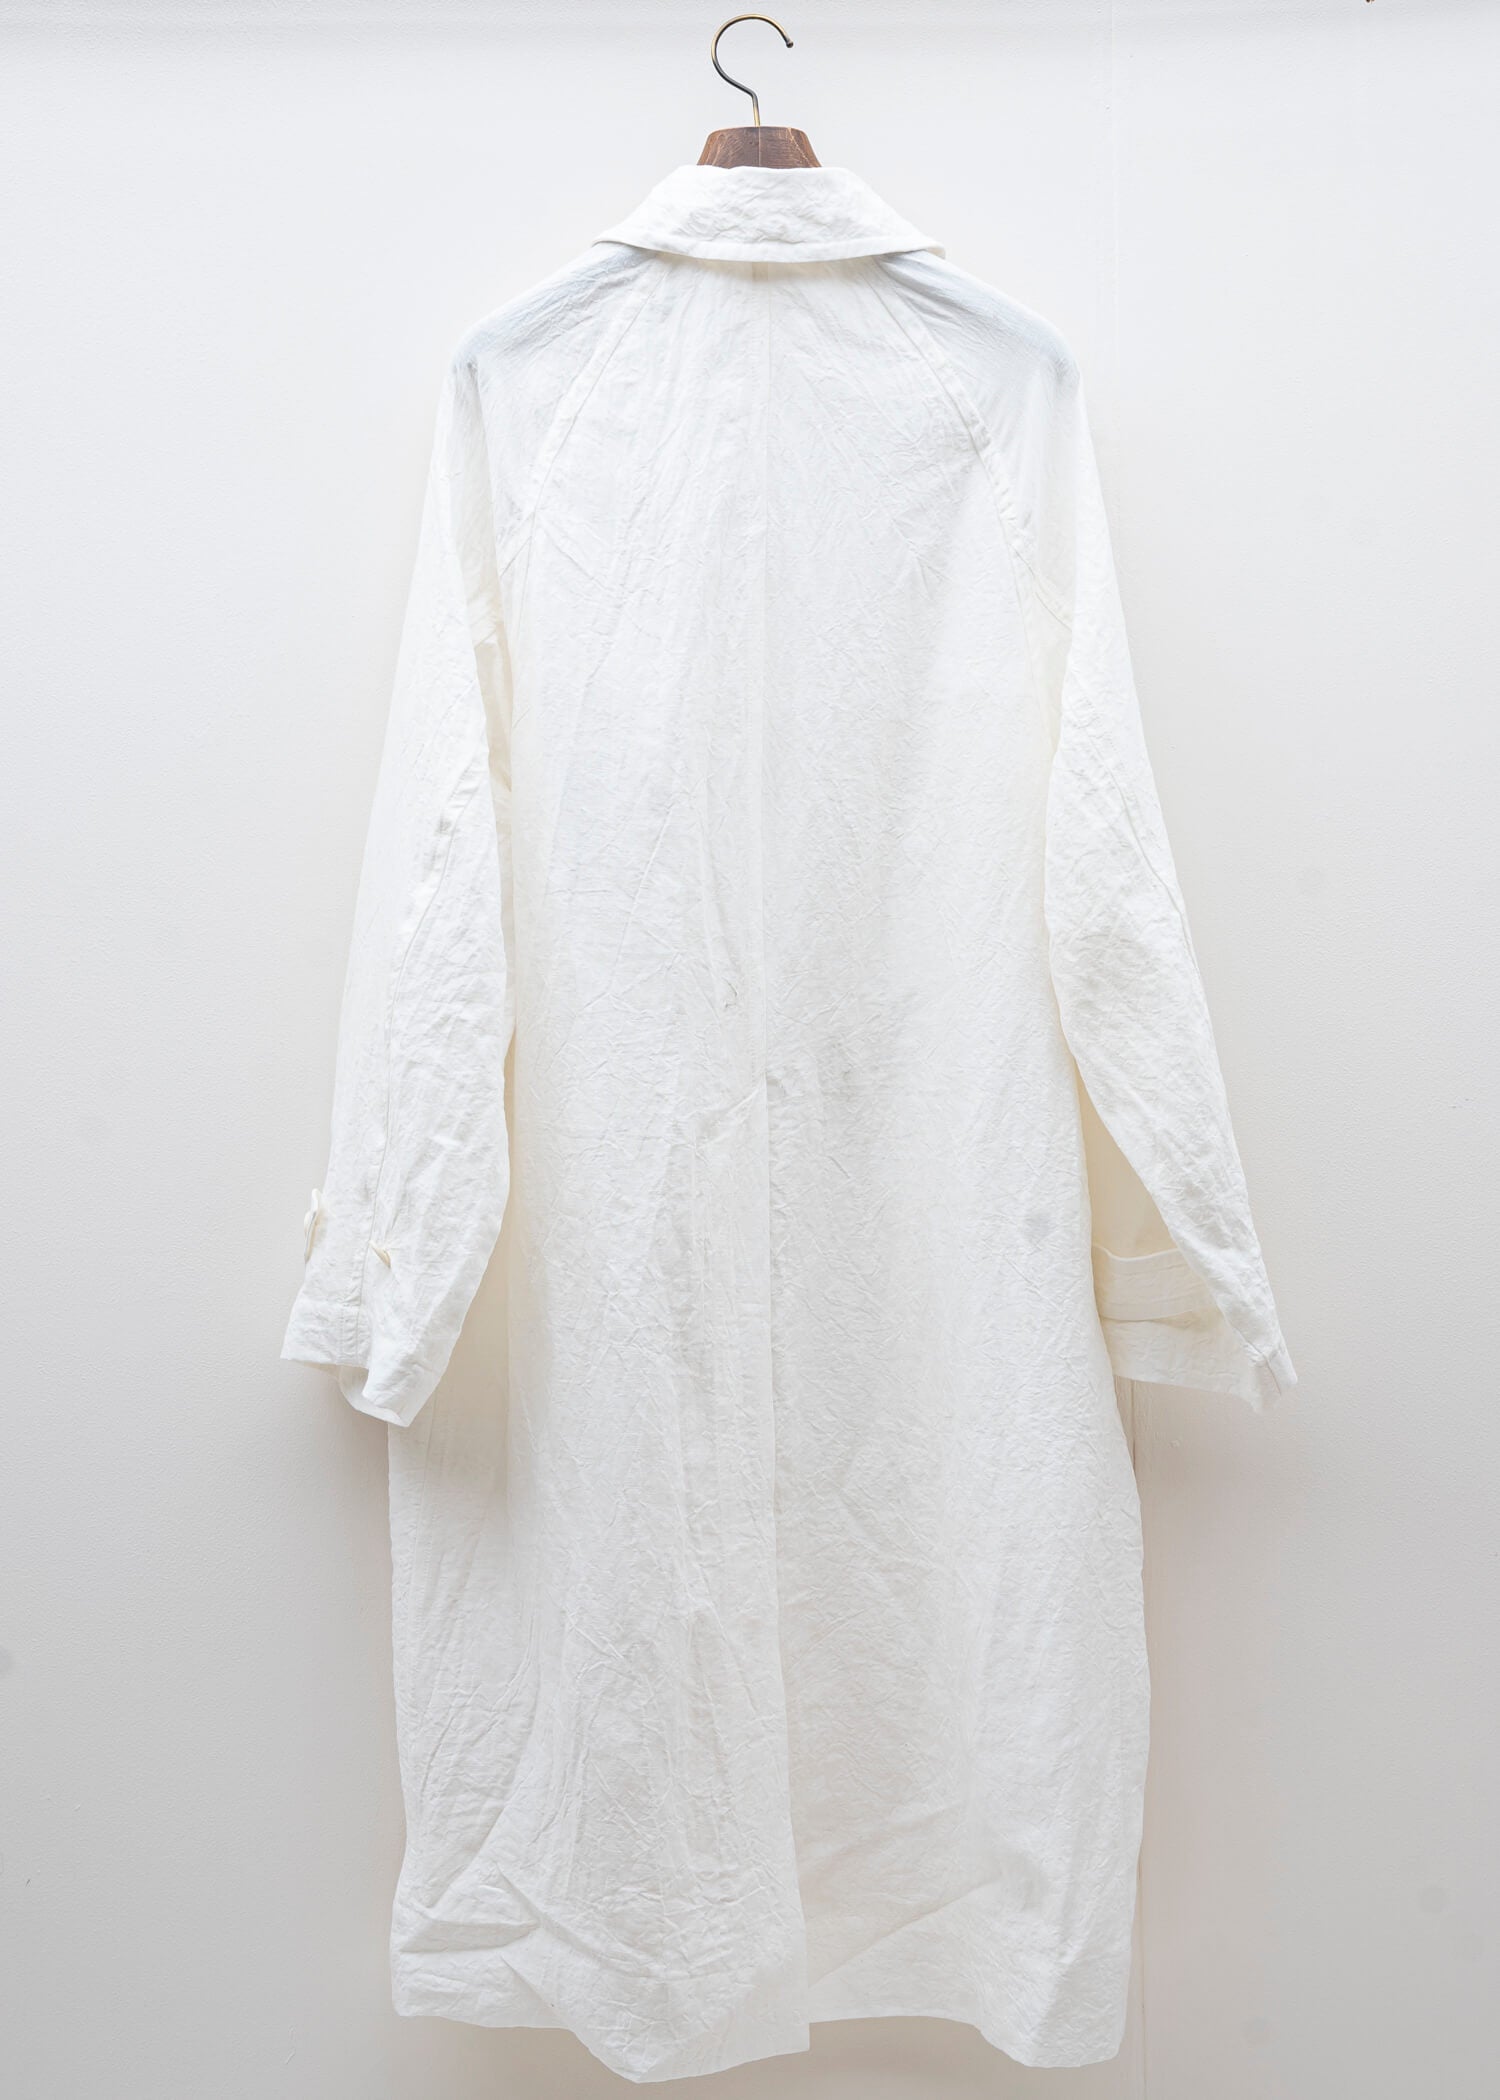 HED MAYNER / TRENCH COAT / WHITE LINEN